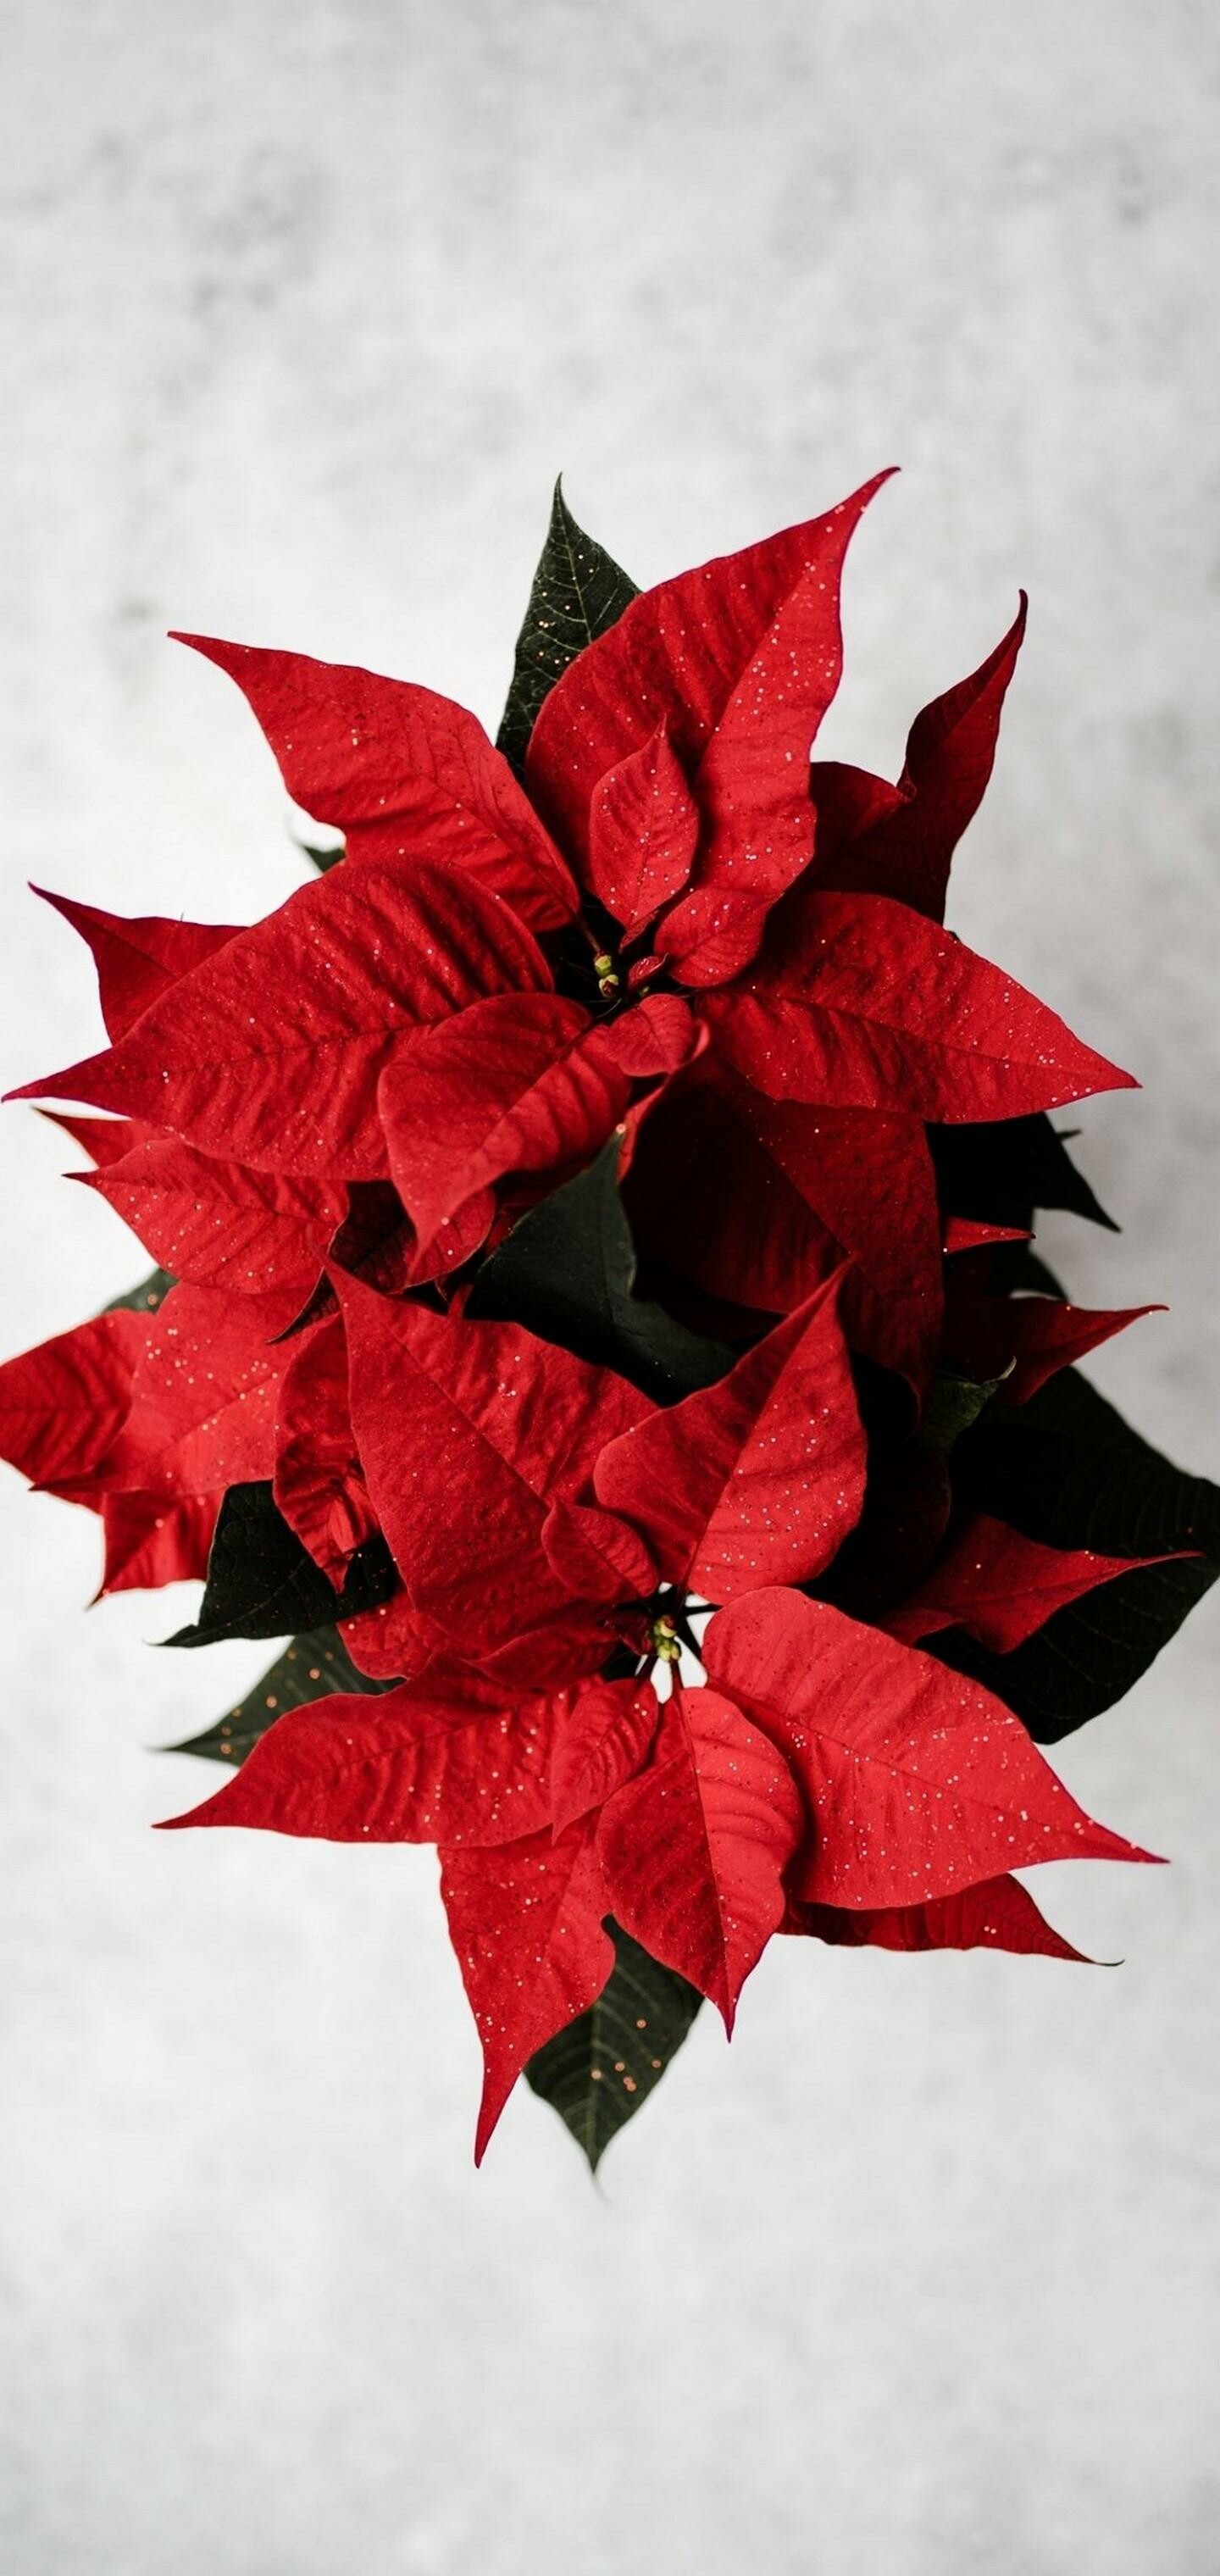 Poinsettia: Every year in the US, approximately 70 million poinsettias of many cultivated varieties are sold in a six-week Christmas period. 1440x3040 HD Wallpaper.